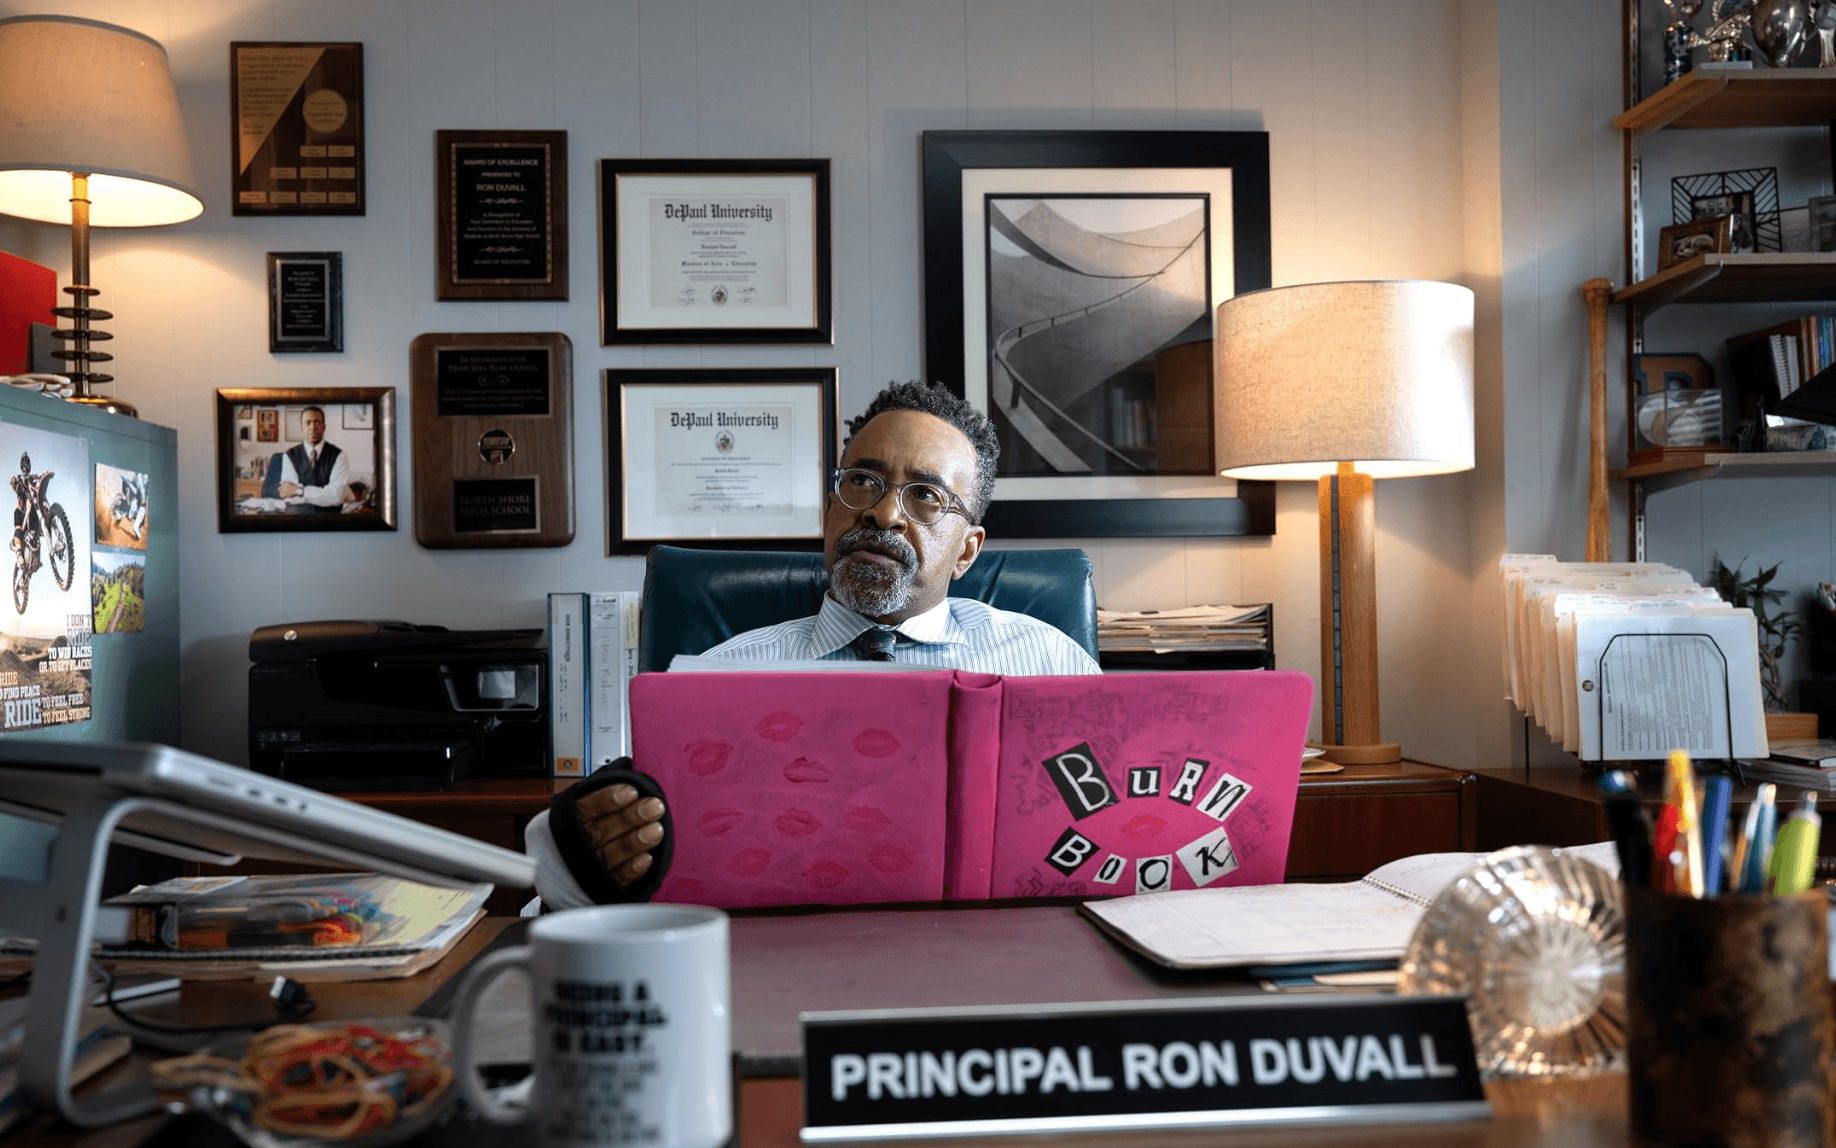 Tim Meadows return to "Mean Girls Musical" film as Principal Duvall, who is holding the iconic pink burn book